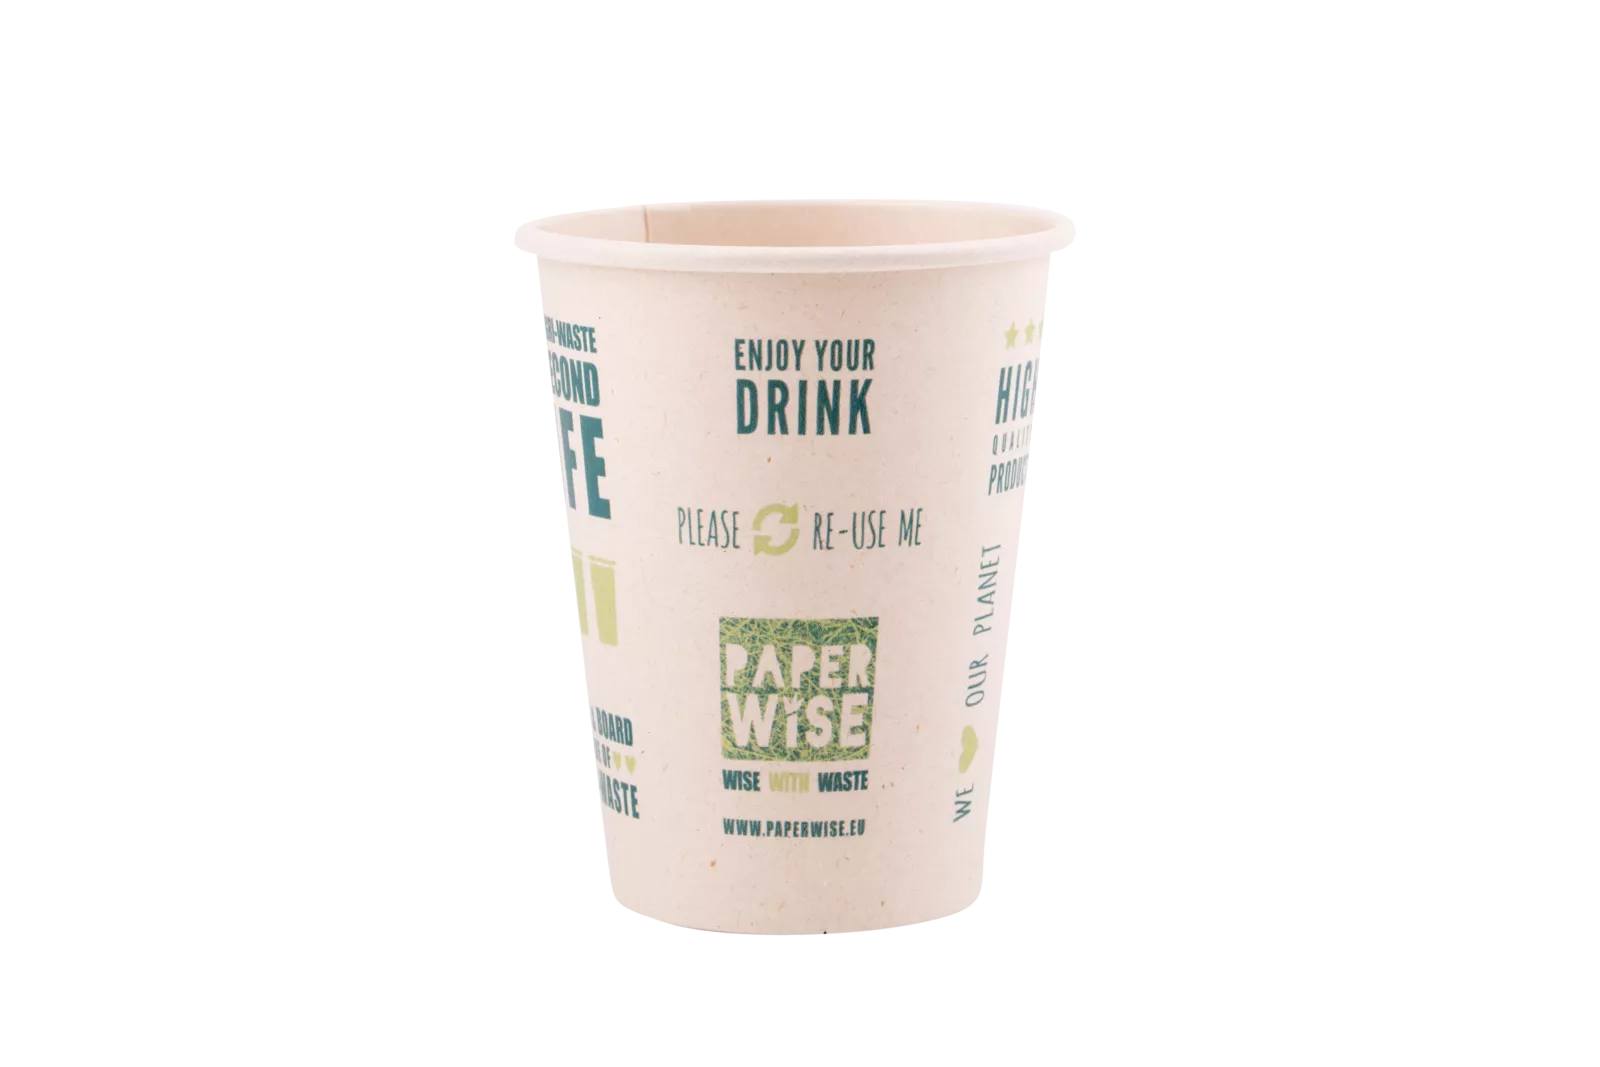 PaperWise bio cup environmentally friendly disposable paper tea coffee drinking cup packaging office5c